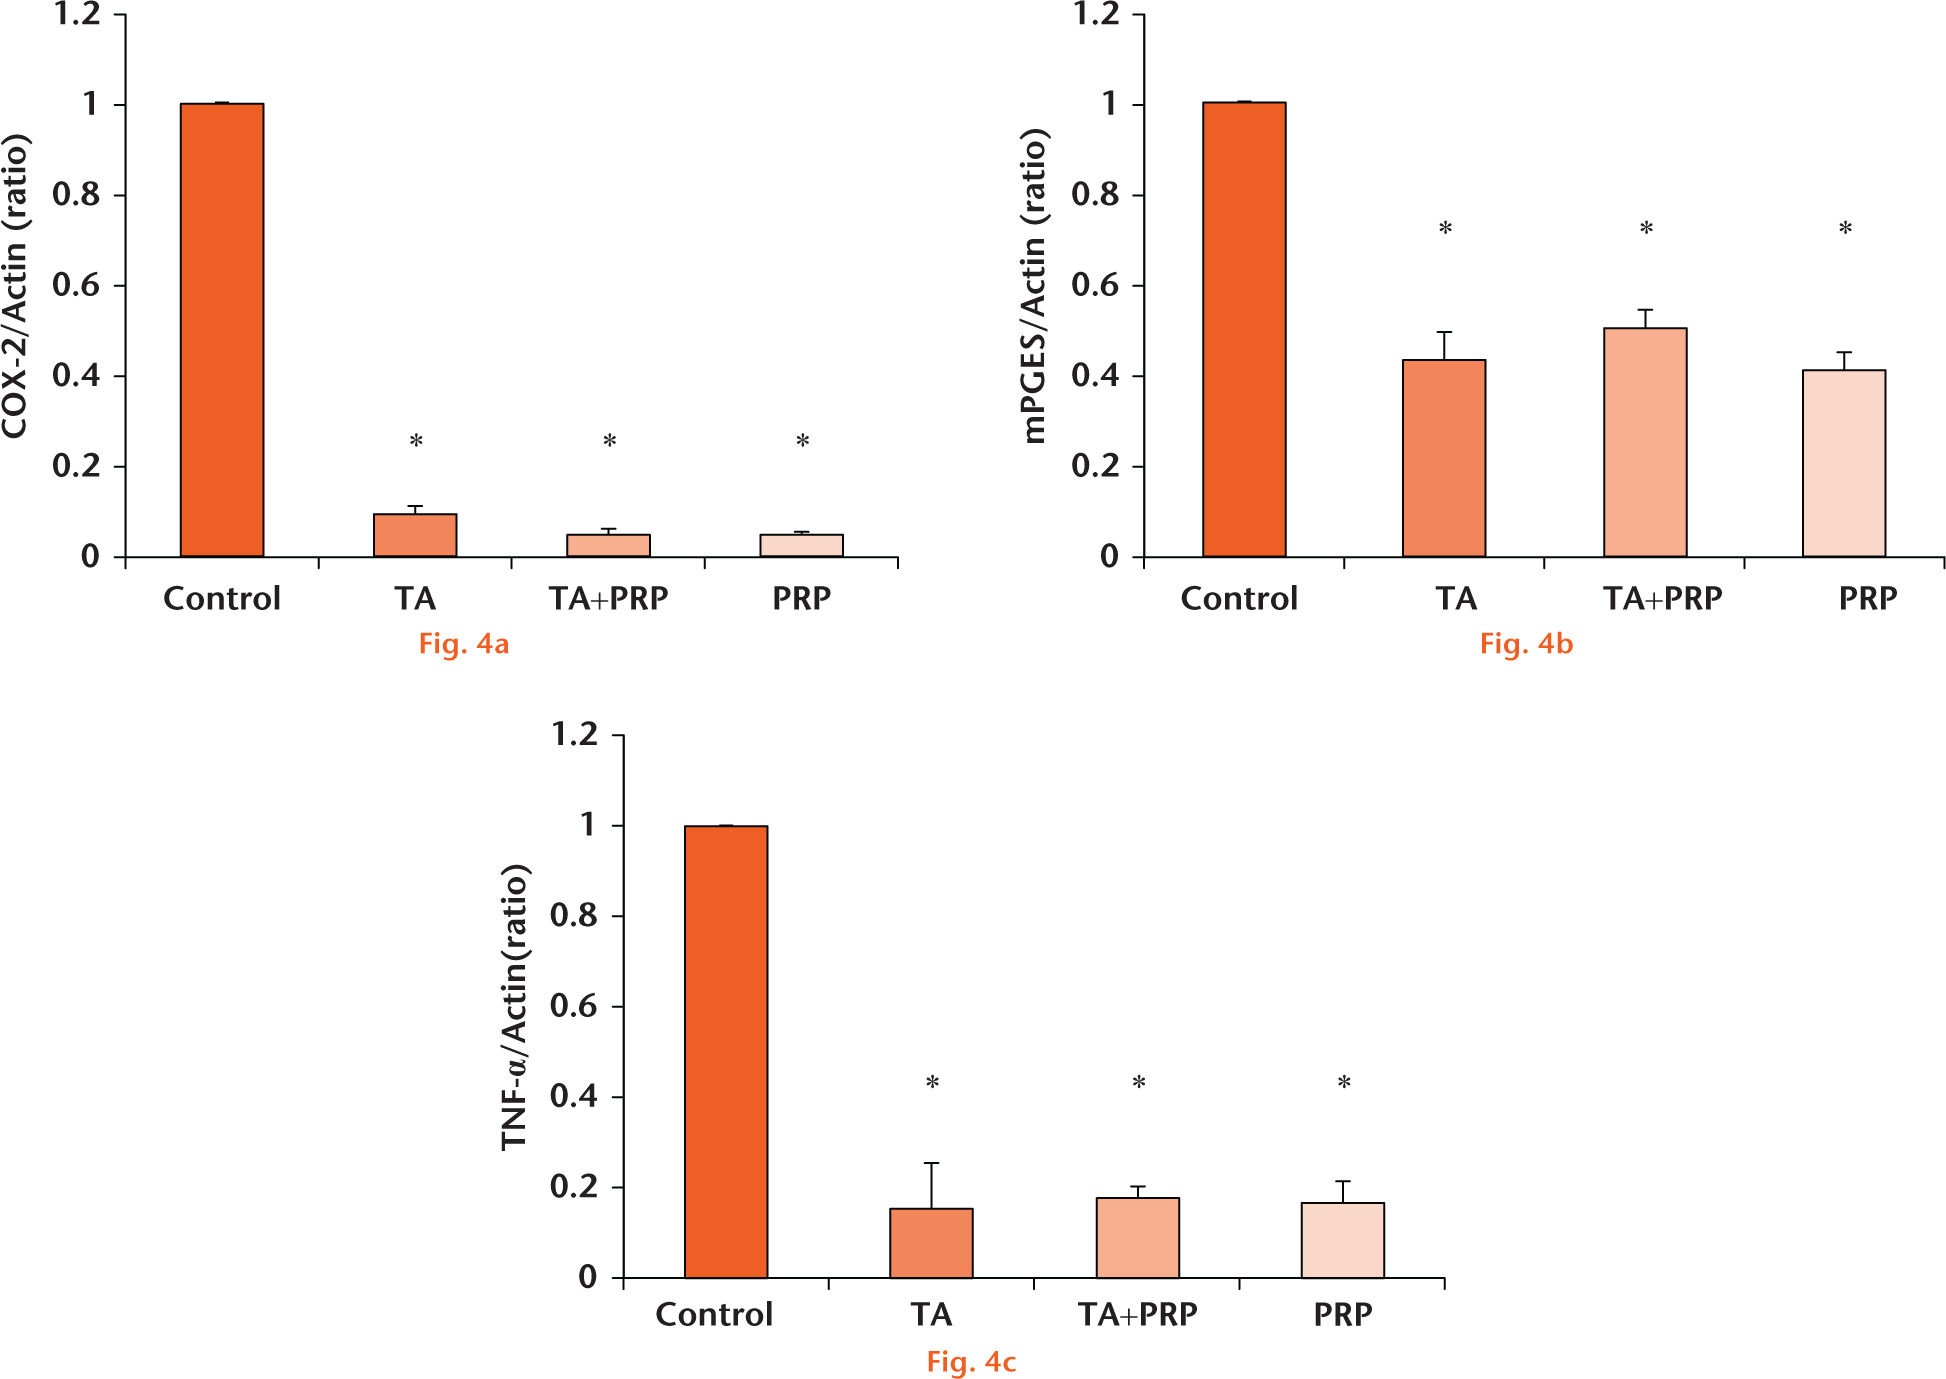  
            Graphs showing real-time PCR expression of serum free medium cultivation group and interleukin-1ß cultivation group (a; Cyclooxygenase-2 (COX-2), b; membrane-associated PGE synthase (mPGES), c; tumour necrosis factor (TNF)-α) (* p < 0.01)
          